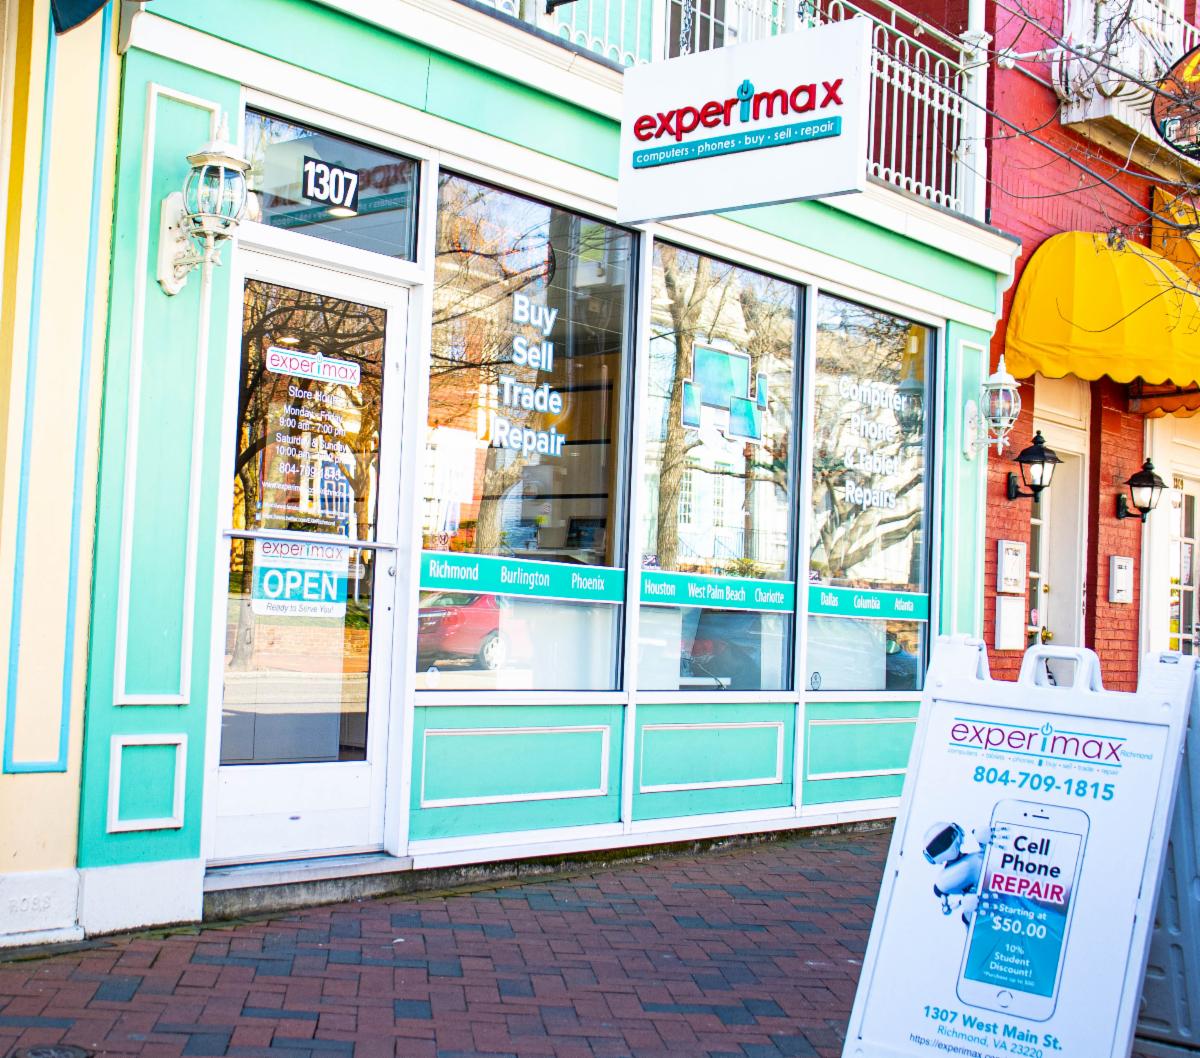 Come say hi! Need computer help? In the market for a new phone? Drop by our Main Street location, 1307 W Main St, Richmond, VA 23220, and our X-perts will be there to help. No reservations needed. #LocalBusiness #Experimax #RVABusiness